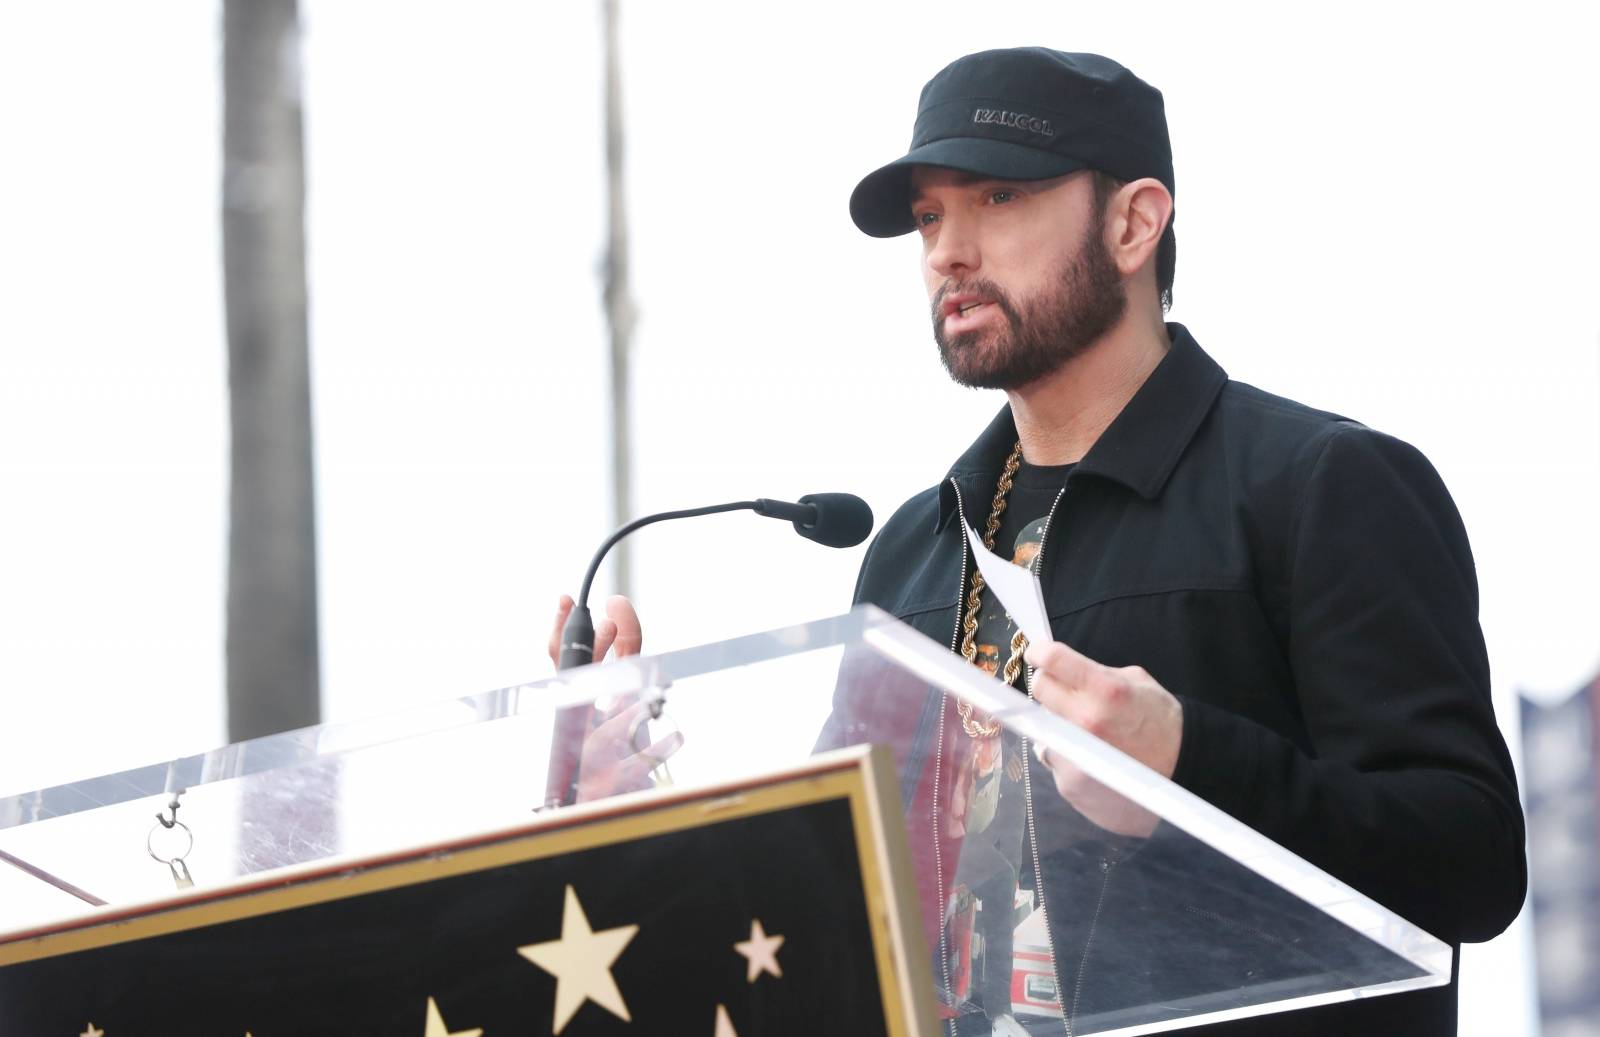 Eminem speaks before the unveiling of the star for rapper Curtis "50 Cent" Jackson on the Hollywood Walk of Fame in Los Angeles